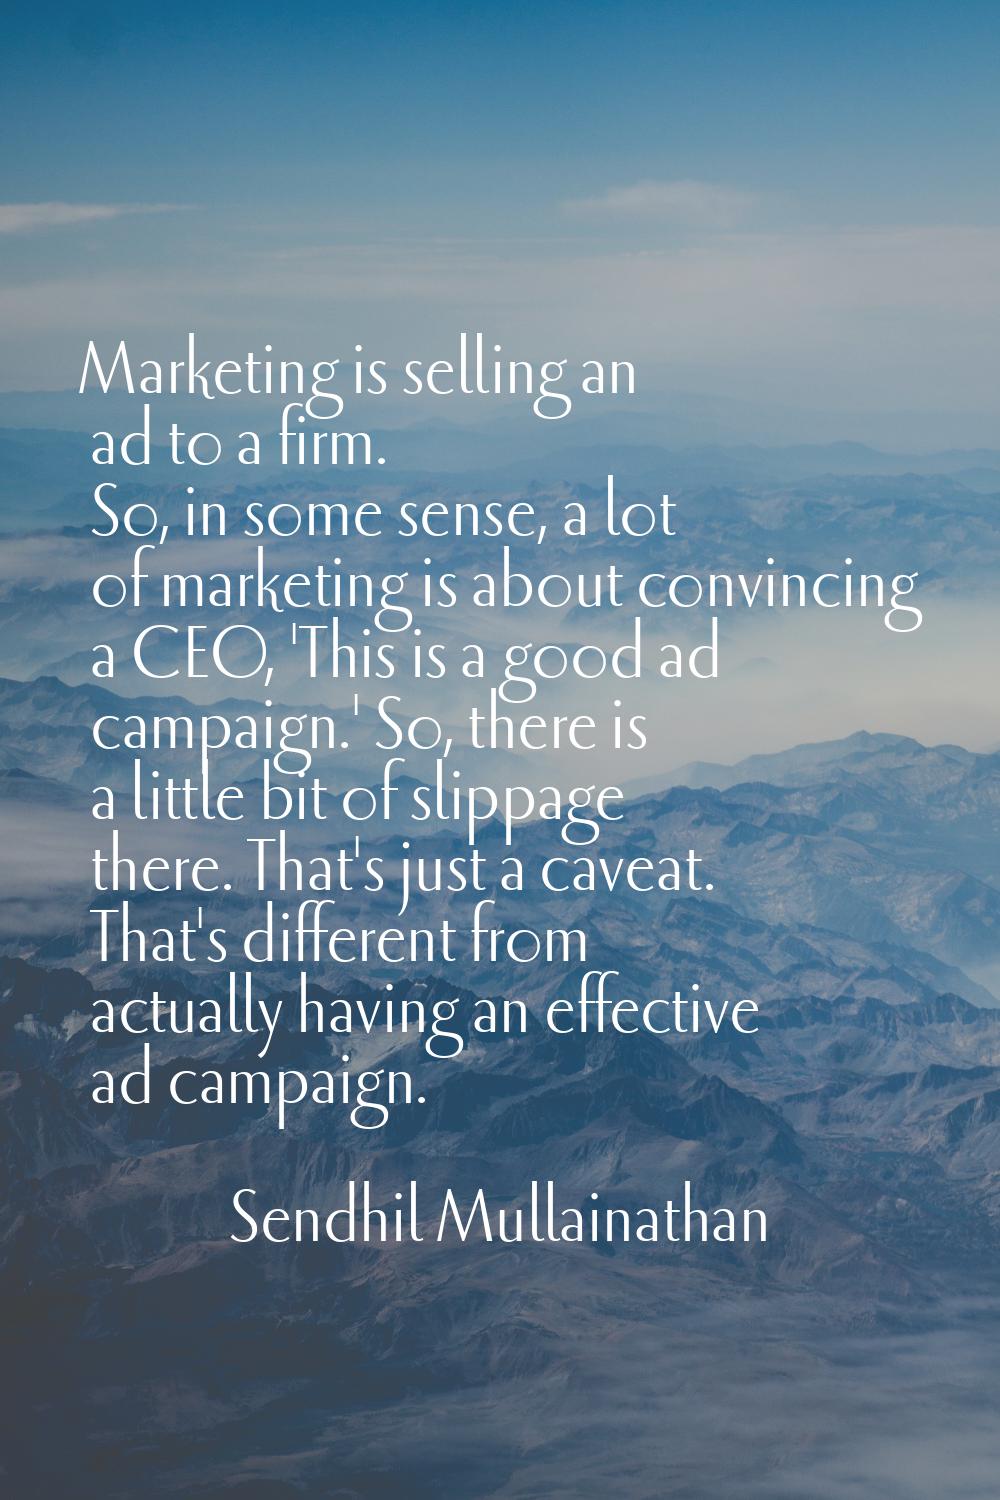 Marketing is selling an ad to a firm. So, in some sense, a lot of marketing is about convincing a C